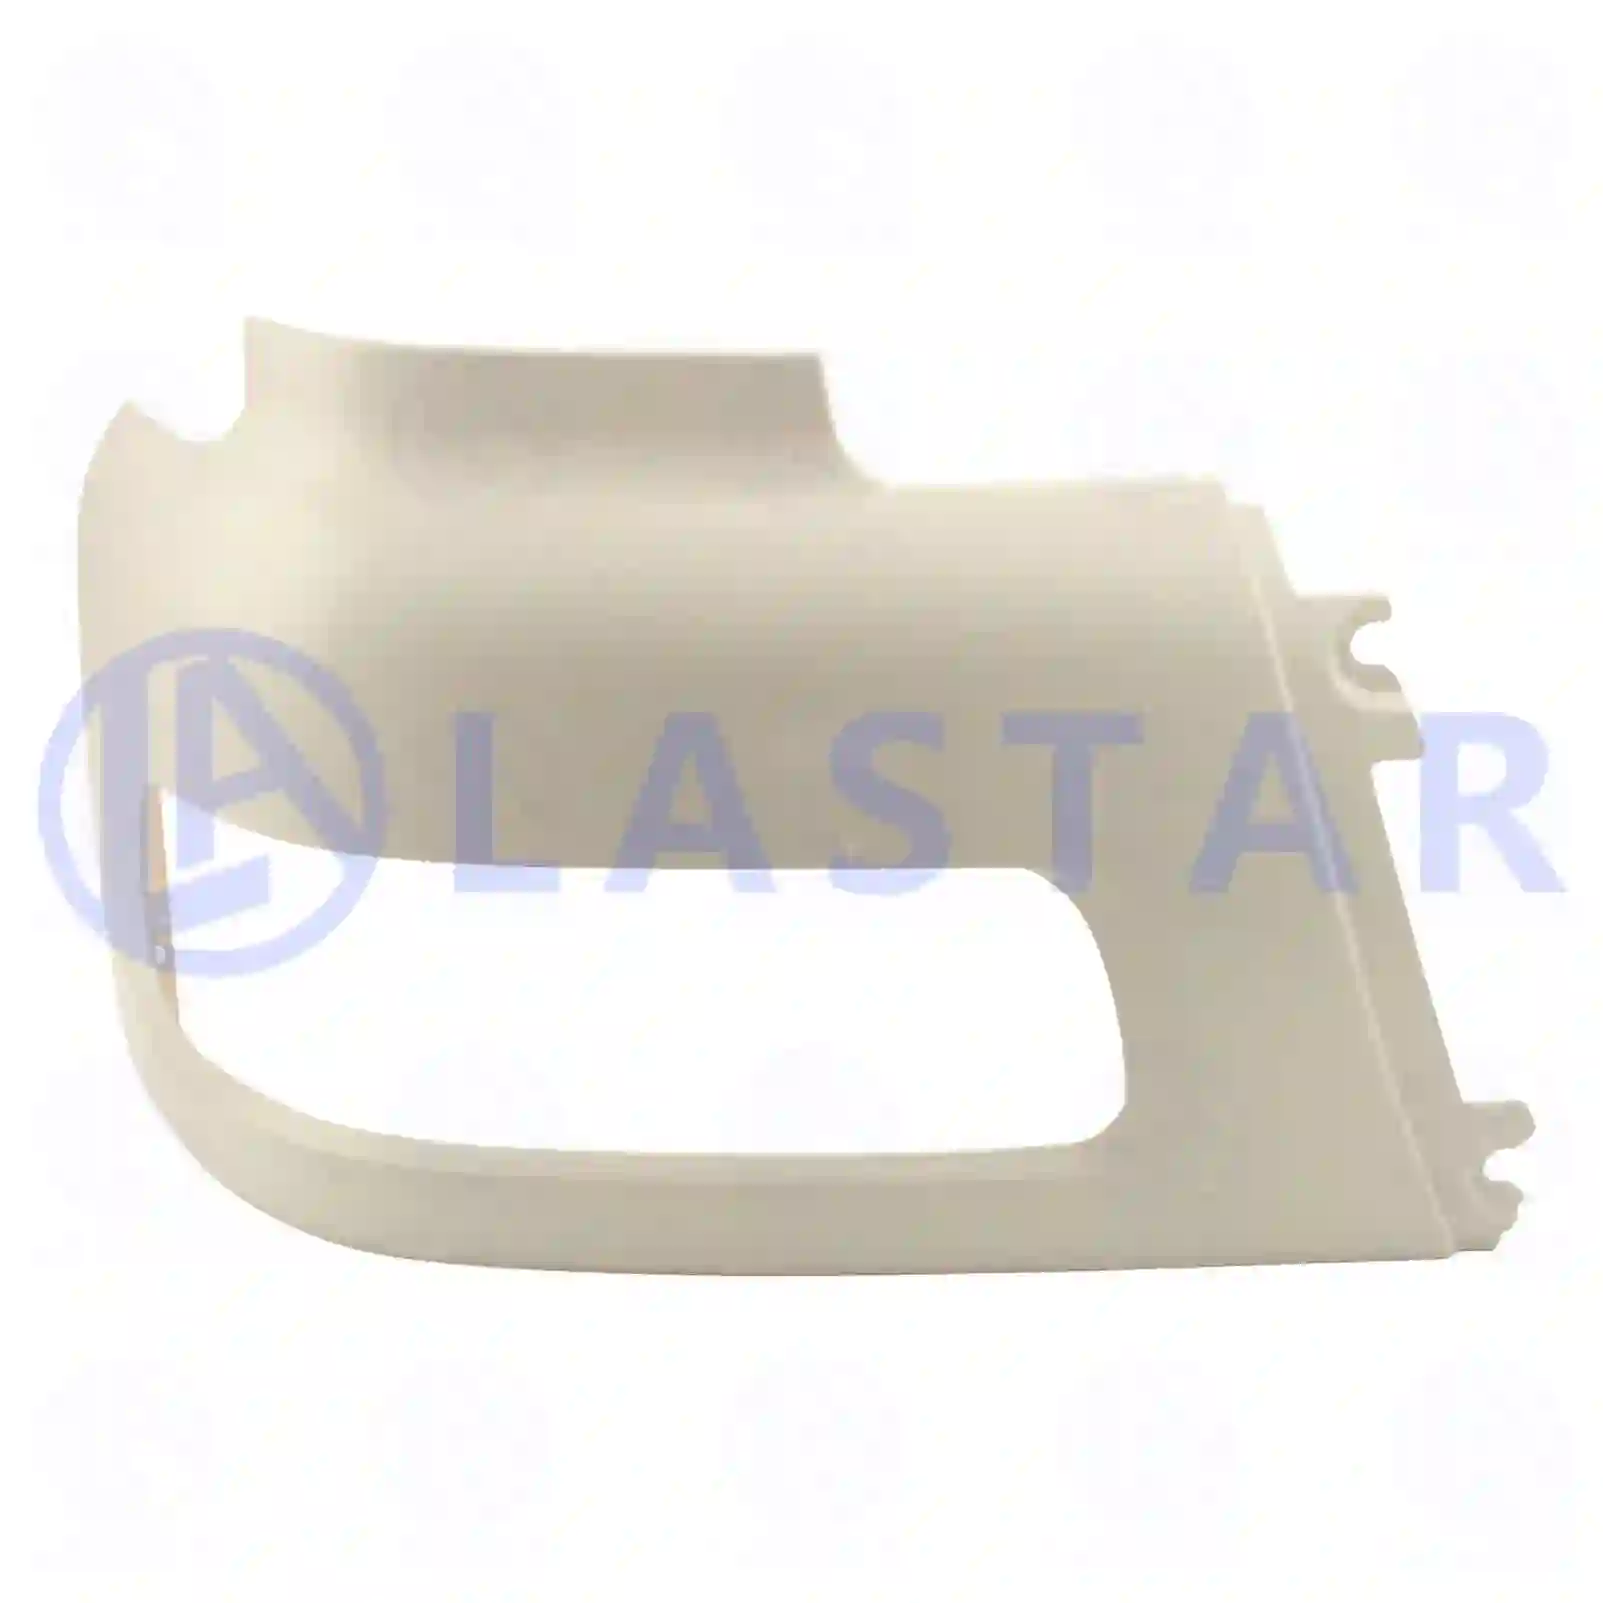 Lamp cover, right, 77712484, 1363374, 1911142, ZG20061-0008 ||  77712484 Lastar Spare Part | Truck Spare Parts, Auotomotive Spare Parts Lamp cover, right, 77712484, 1363374, 1911142, ZG20061-0008 ||  77712484 Lastar Spare Part | Truck Spare Parts, Auotomotive Spare Parts